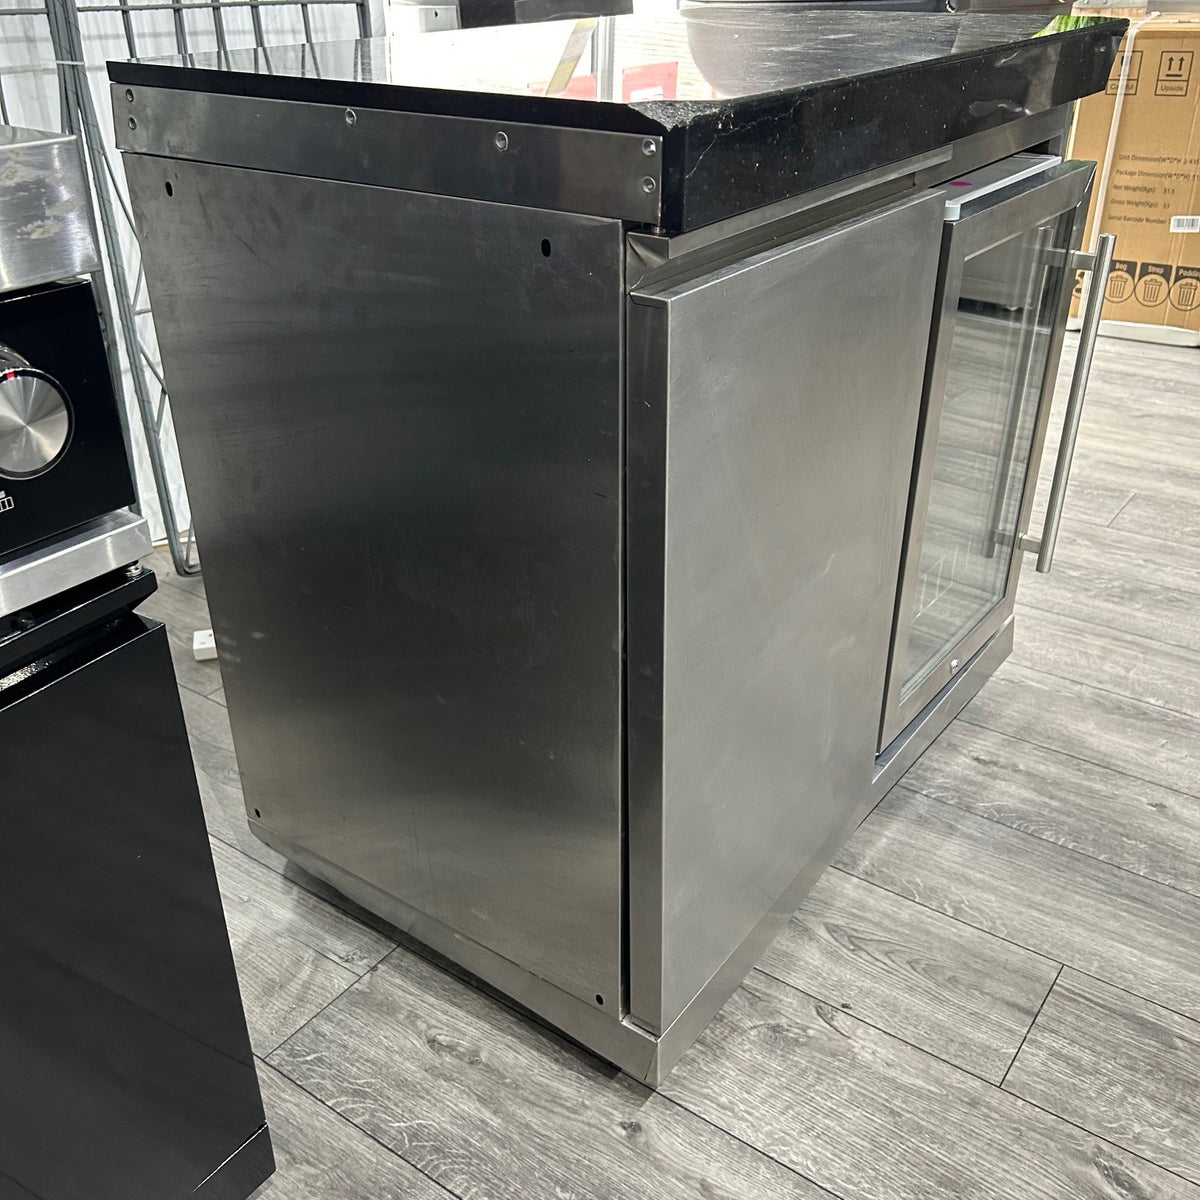 Ex Display Draco Grills 6 Burner Black Outdoor Kitchen with Stainless Steel Single Fridge Unit